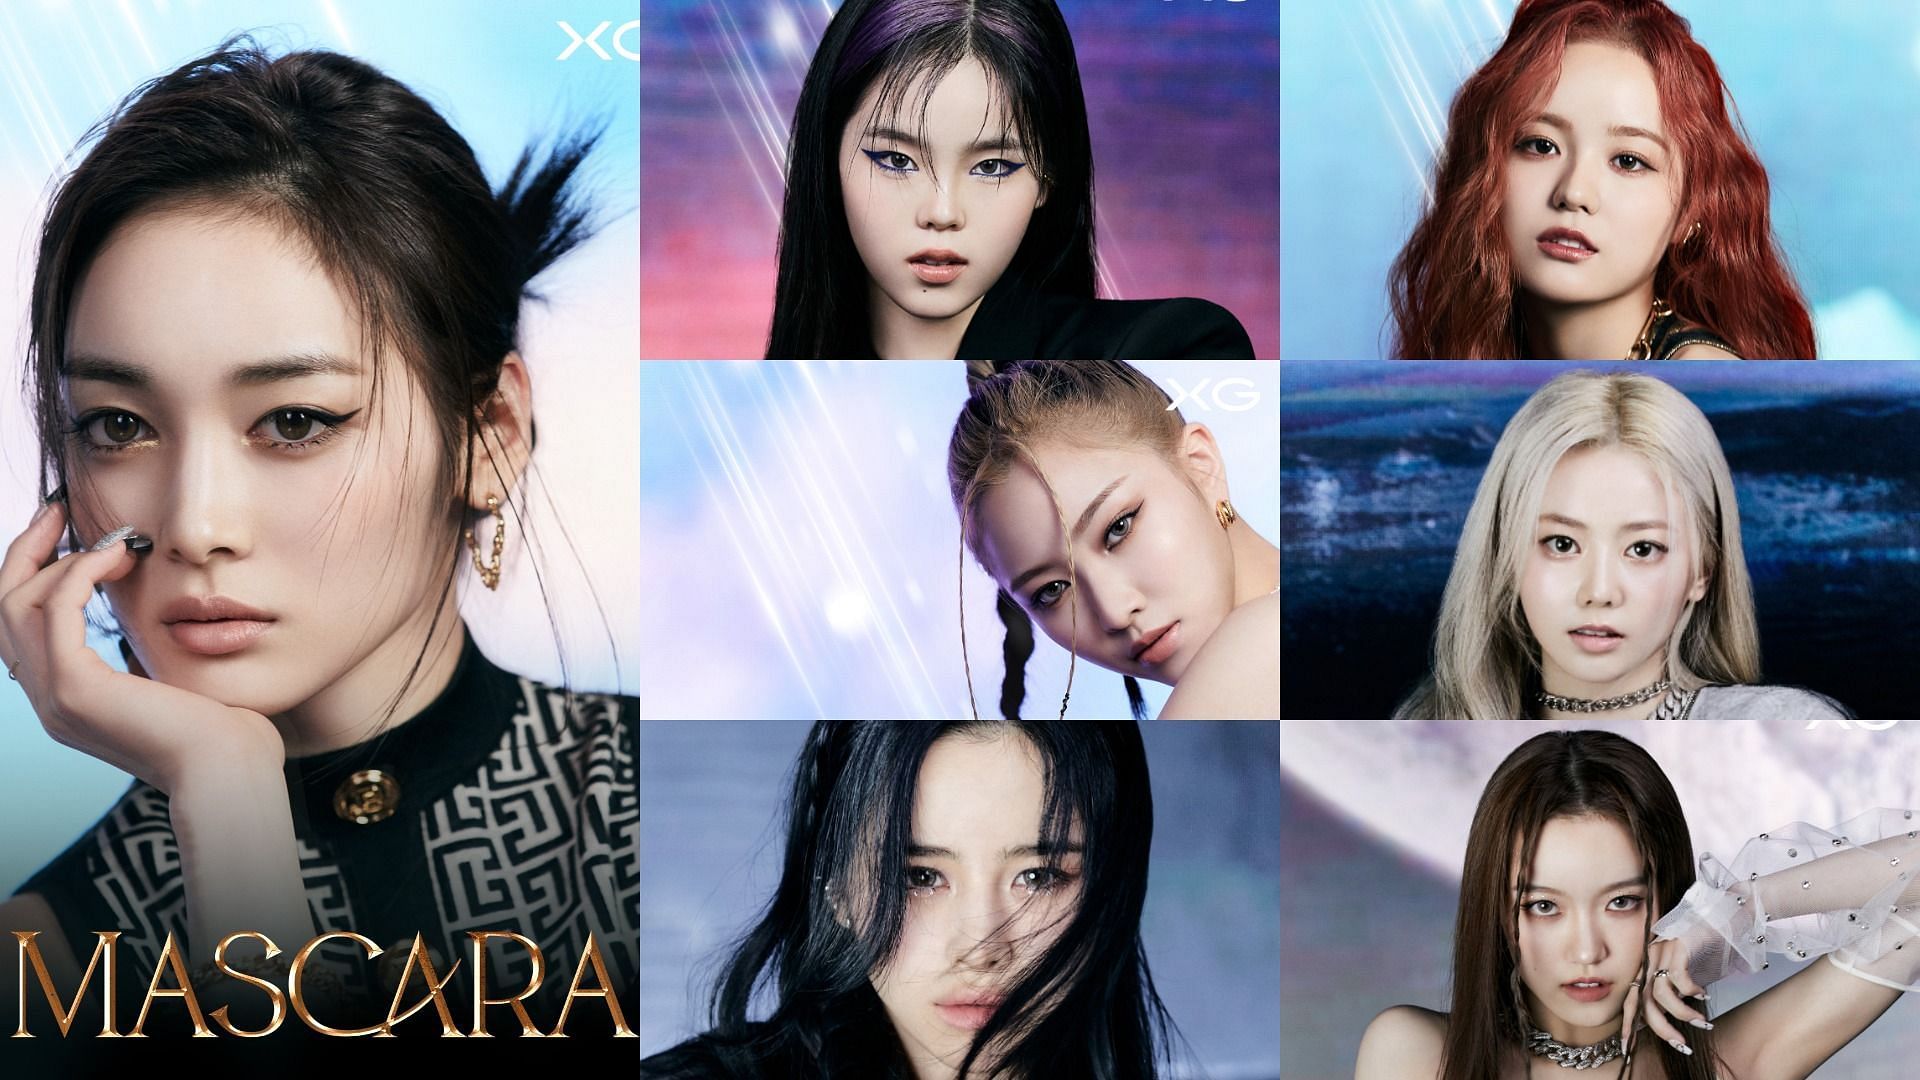 Girl group XG releases visual teasers for upcoming release, MASCARA (Images via @XGOfficial_/Twitter)